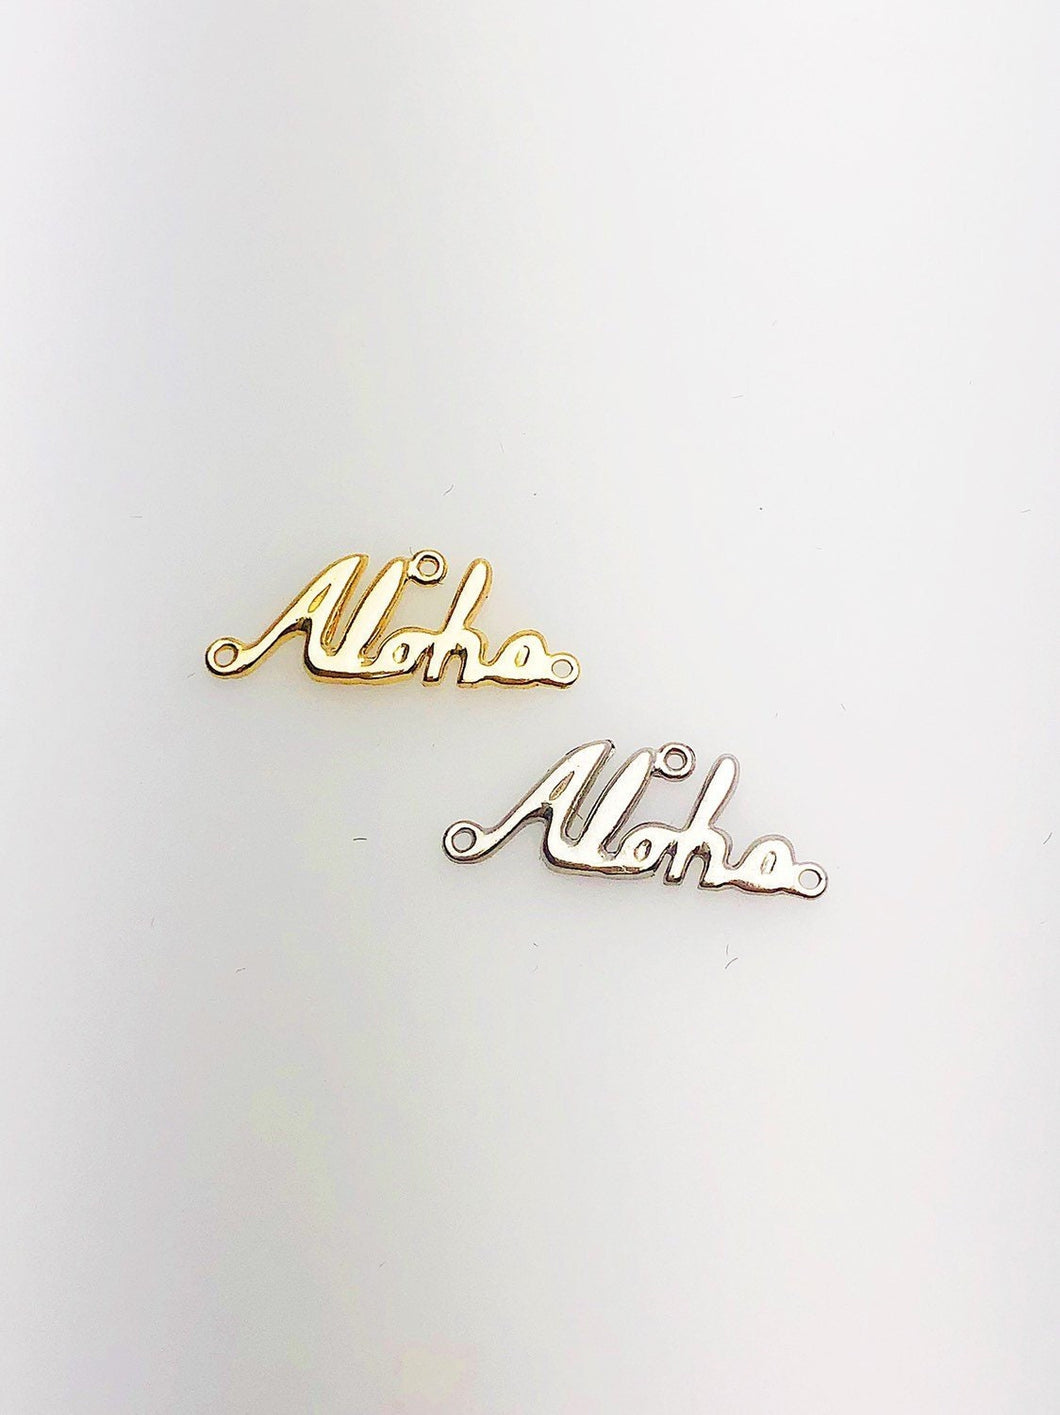 14K Solid Gold Aloha Script Charm w/two Rings, 18.0x6.9mm, Made in USA (L-166)